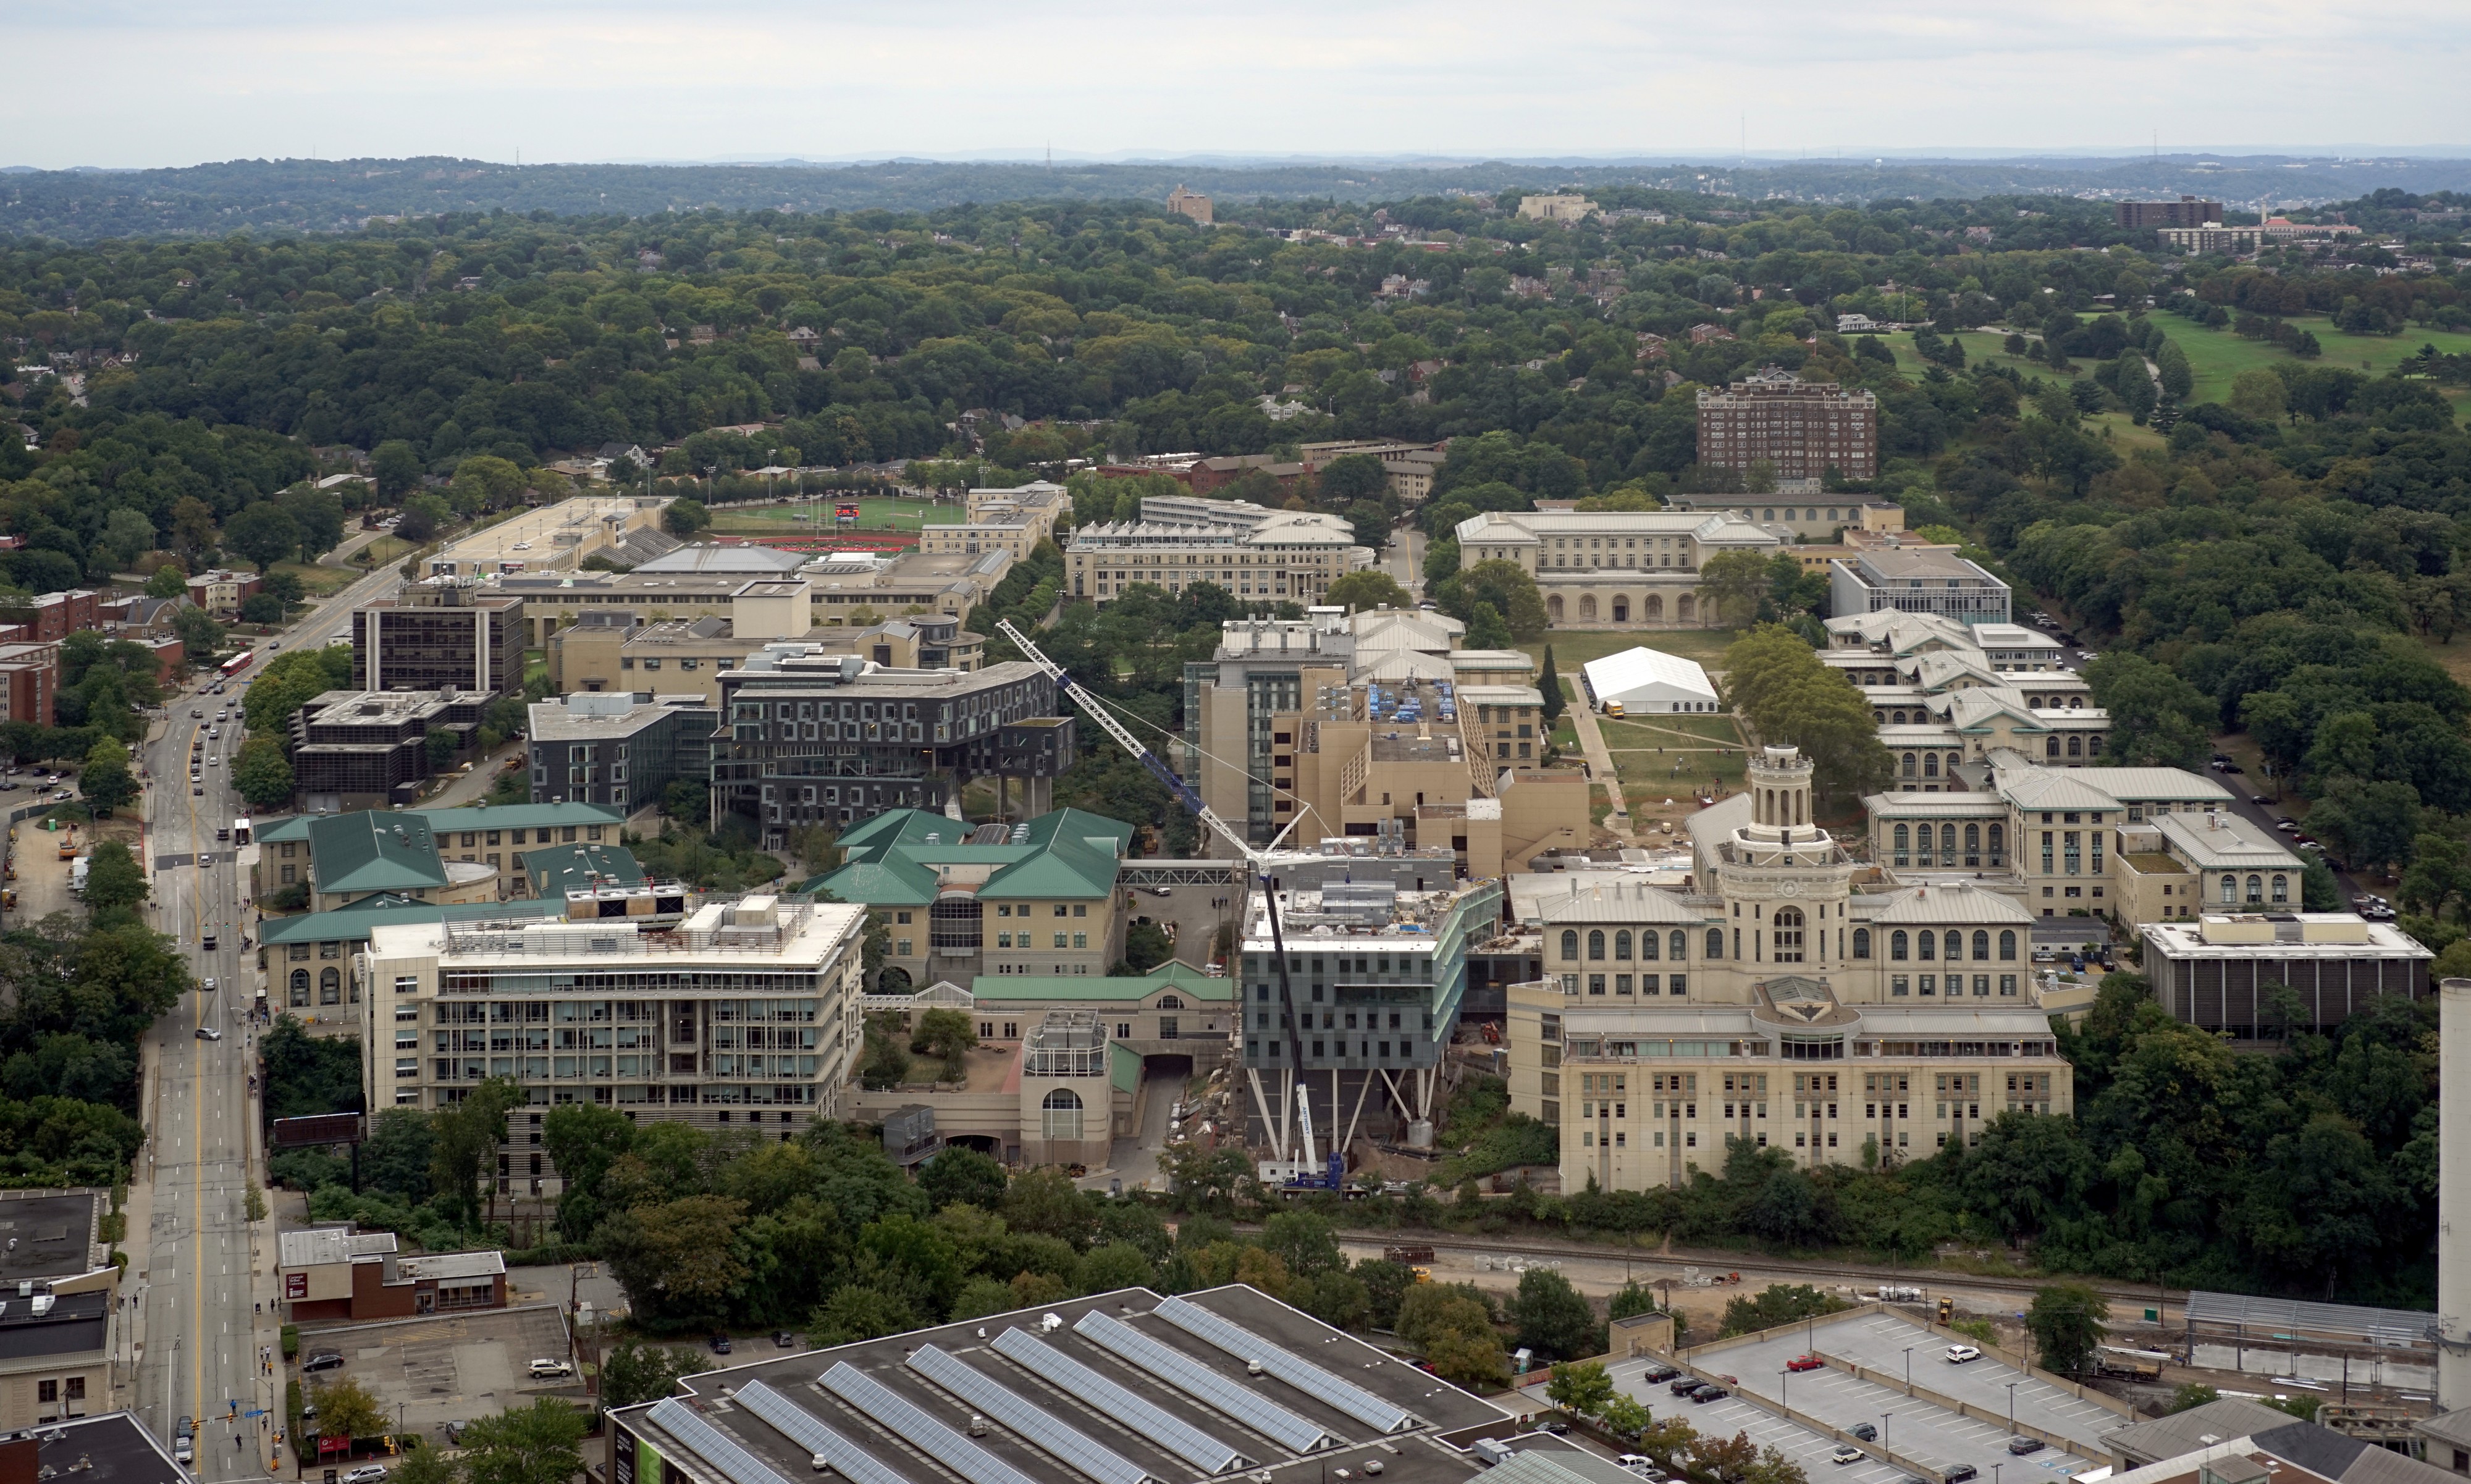 Carnegie Mellon University as seen from the Cathedral of Learning